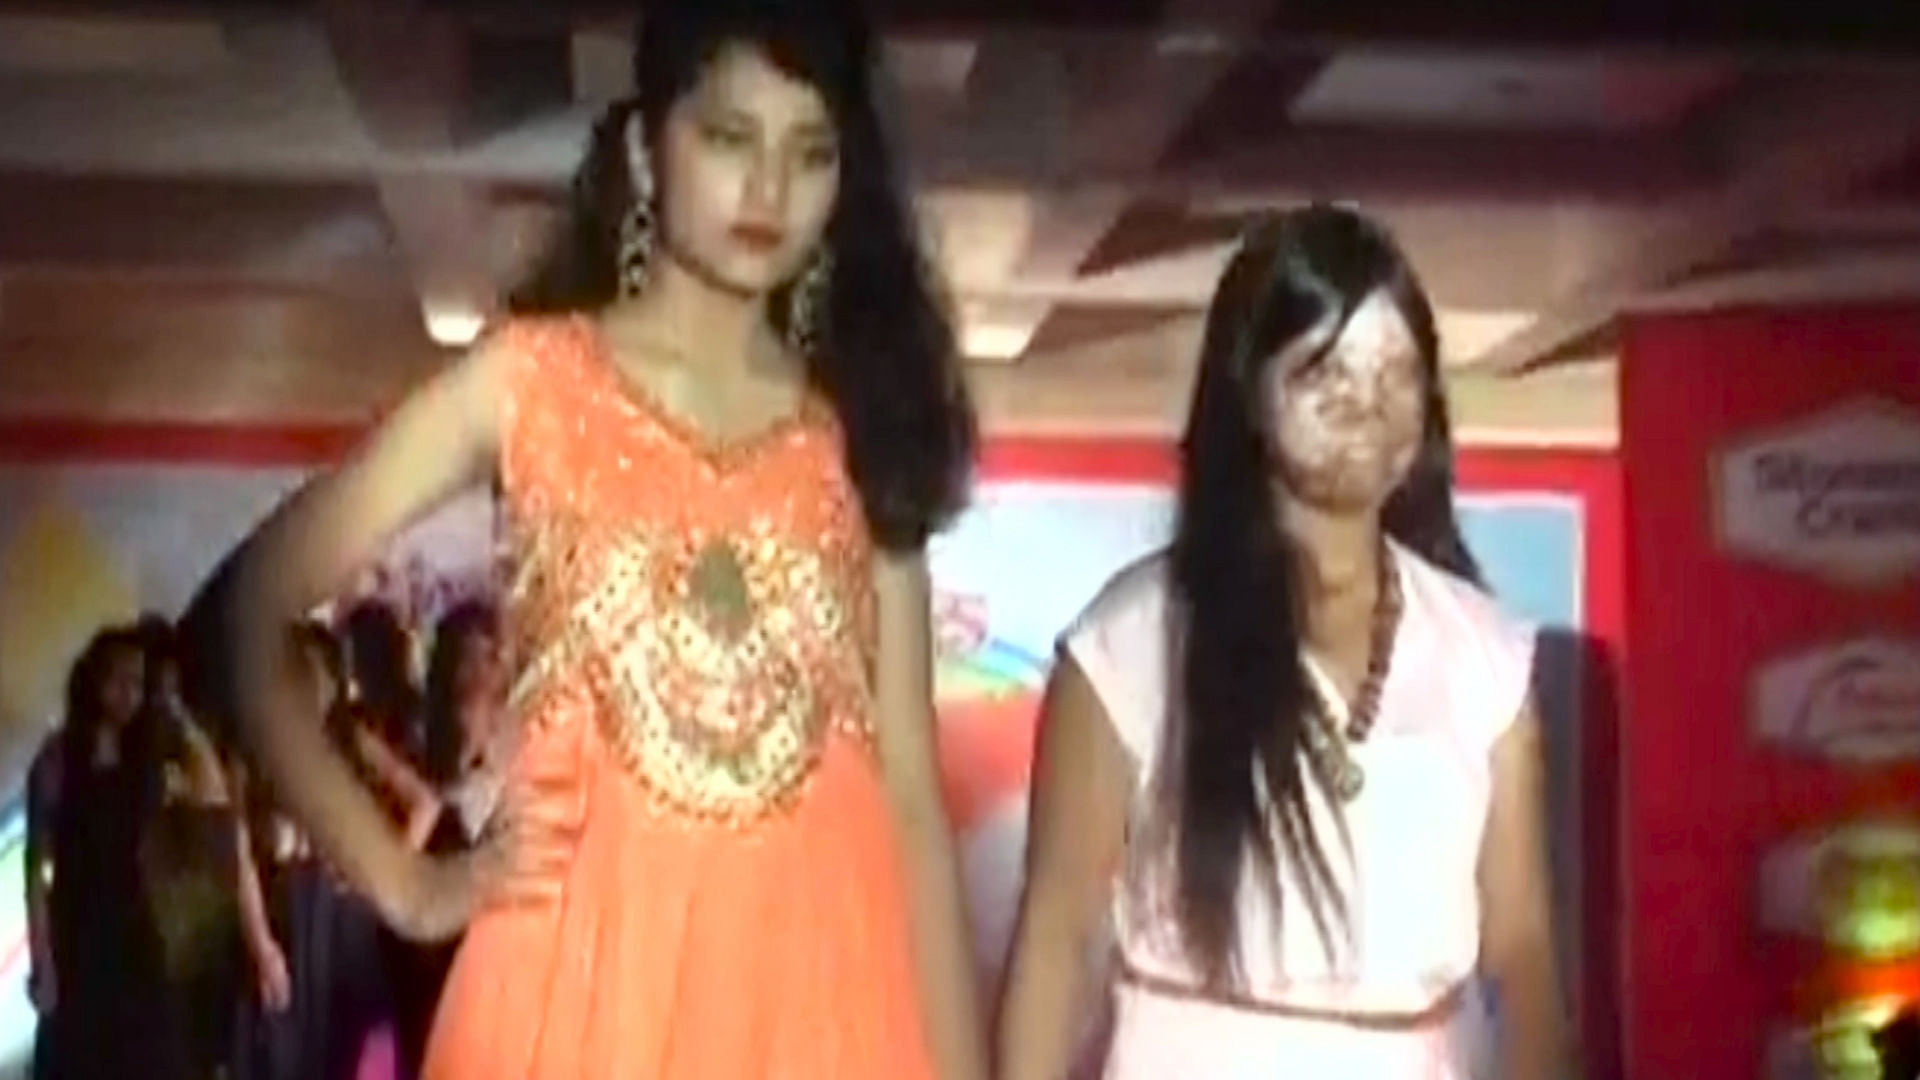 Acid attack victims and eunuchs walked the ramp together for a fashion show in Agra. (Photo: ANI screengrab)